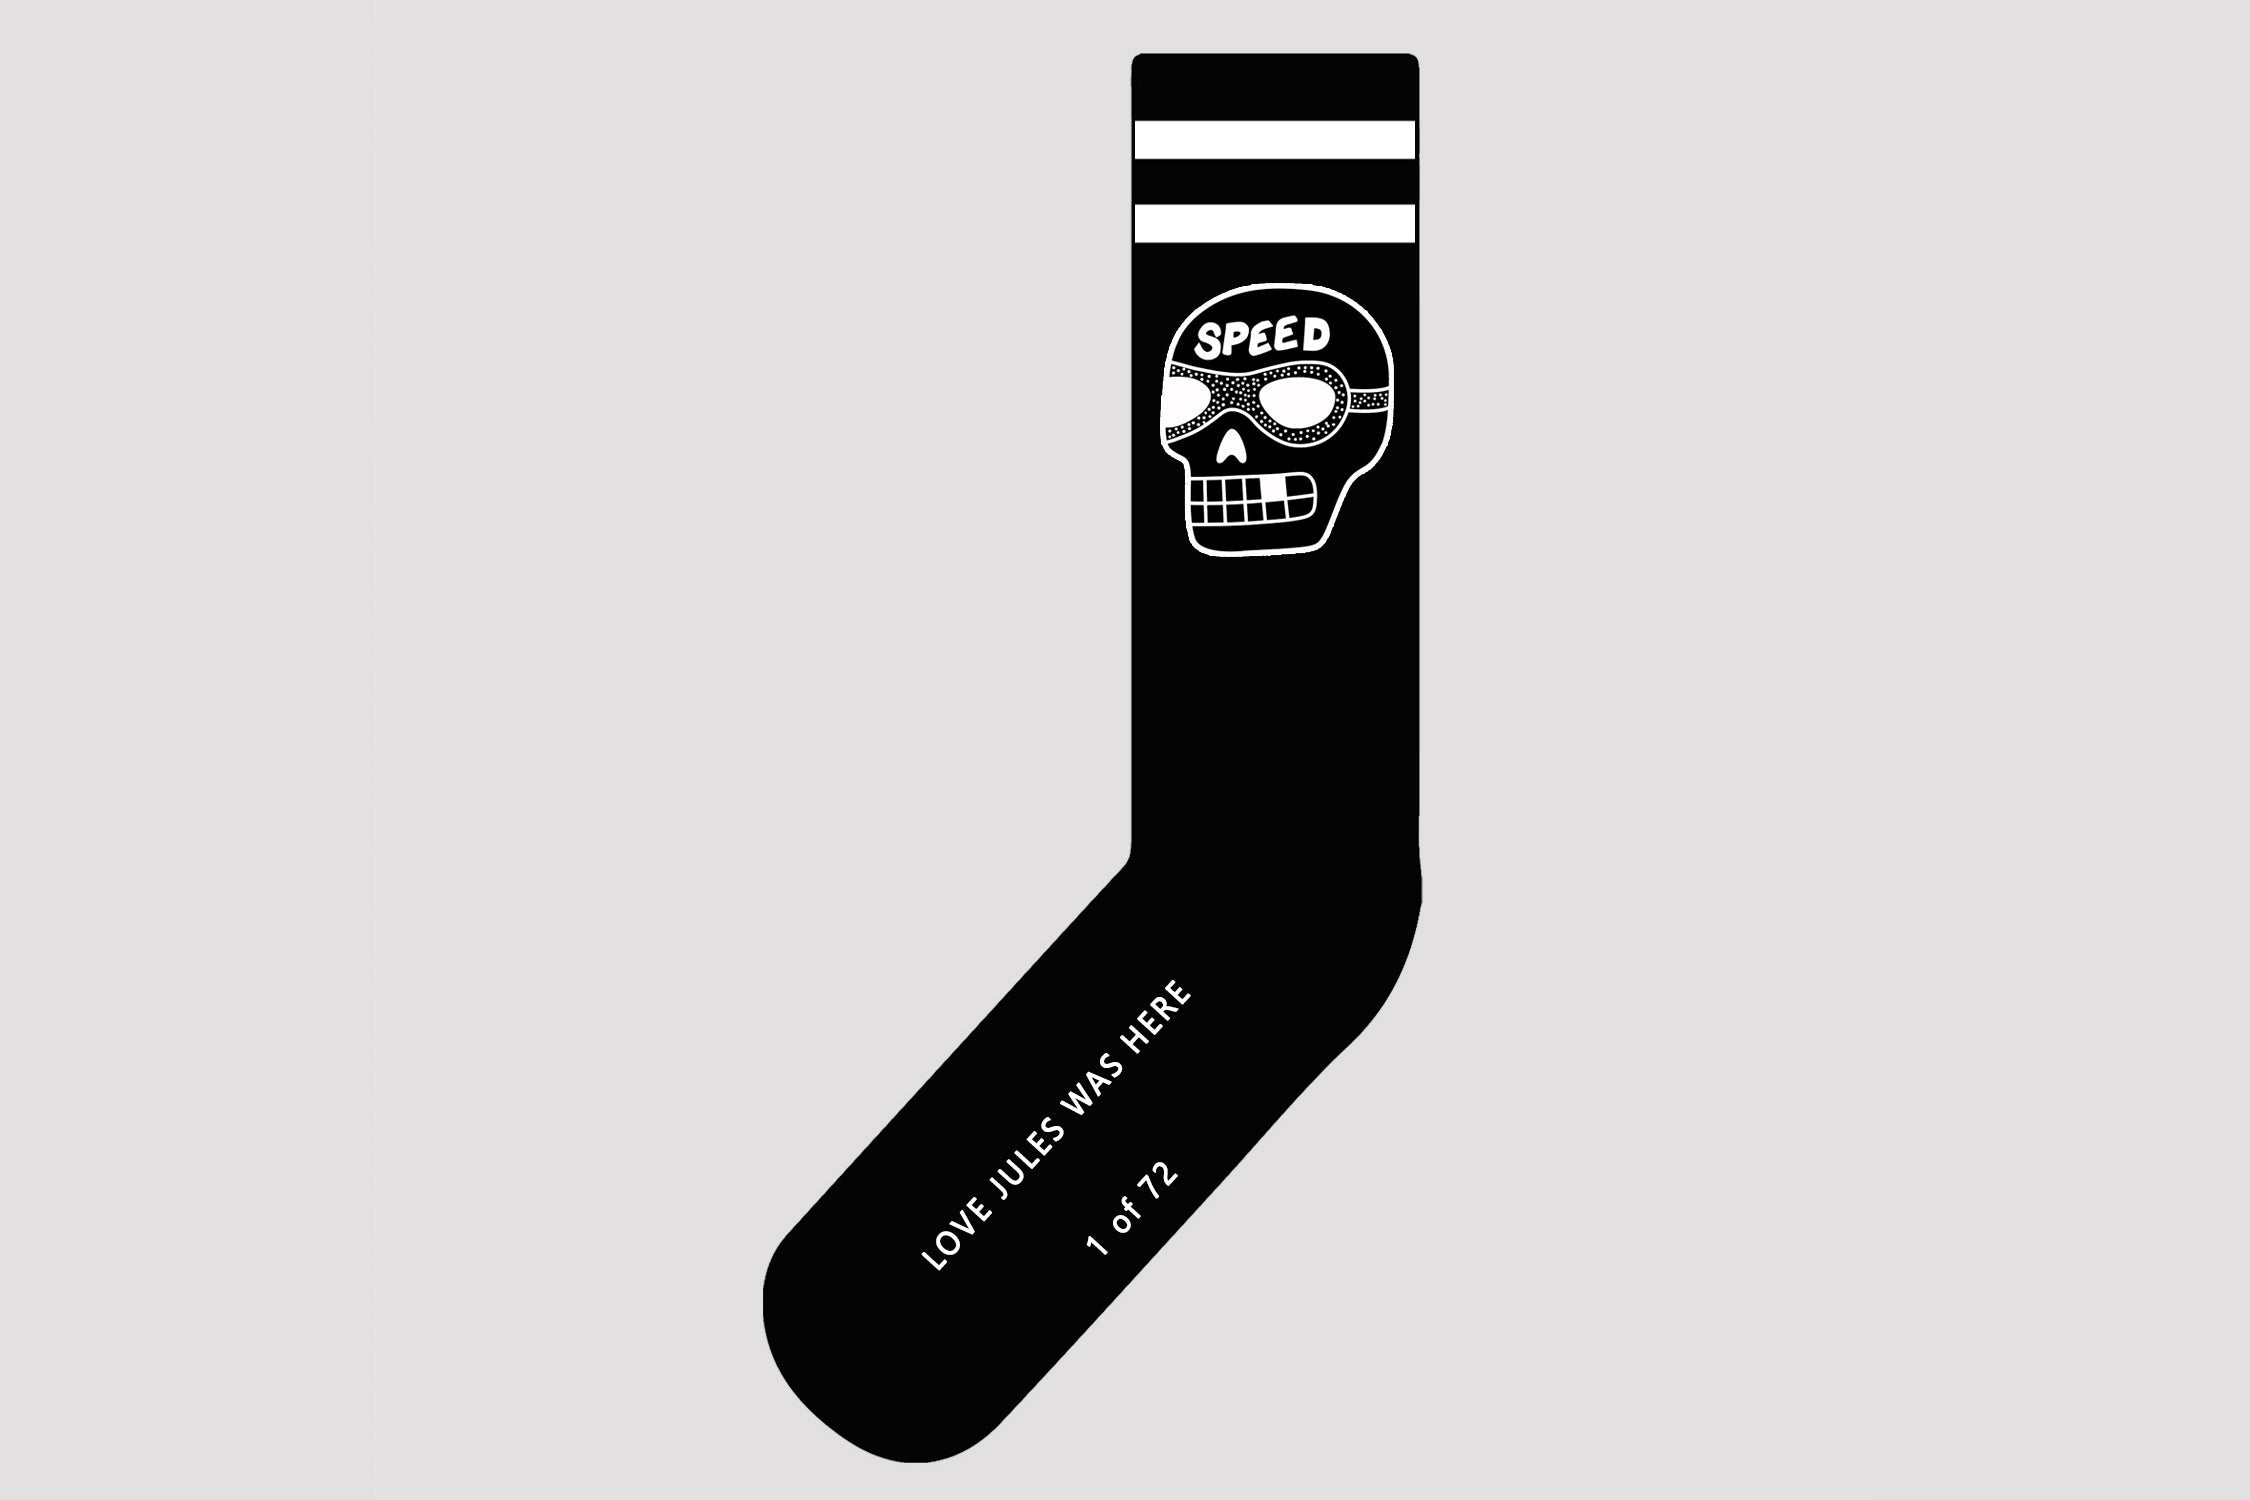 OUR FINAL LIMITED SOCK RUN